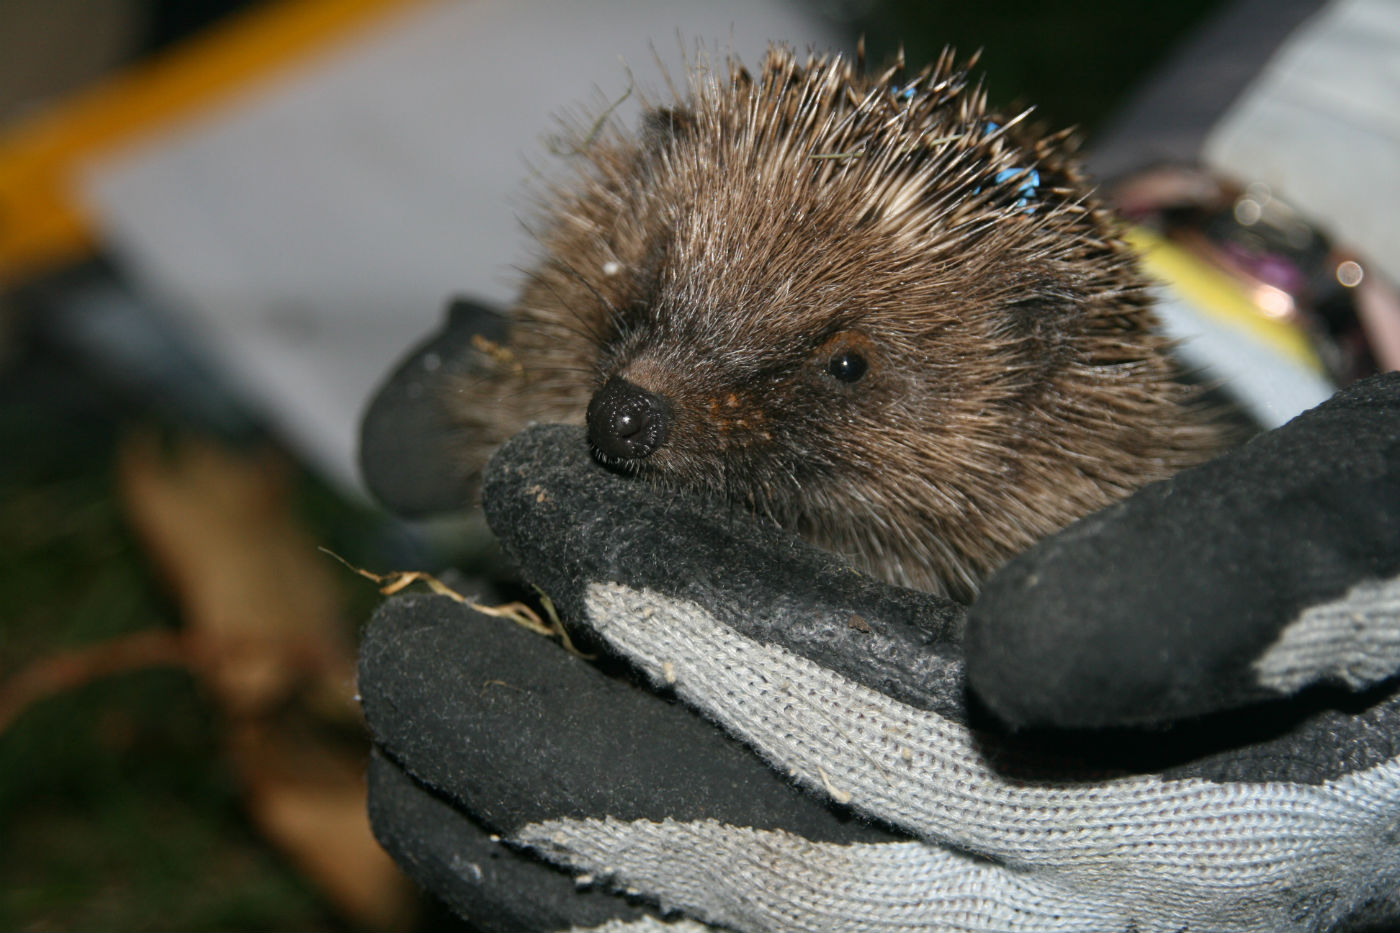 Hedgehog in the palm of a hand. Photo: Clare Bowen 